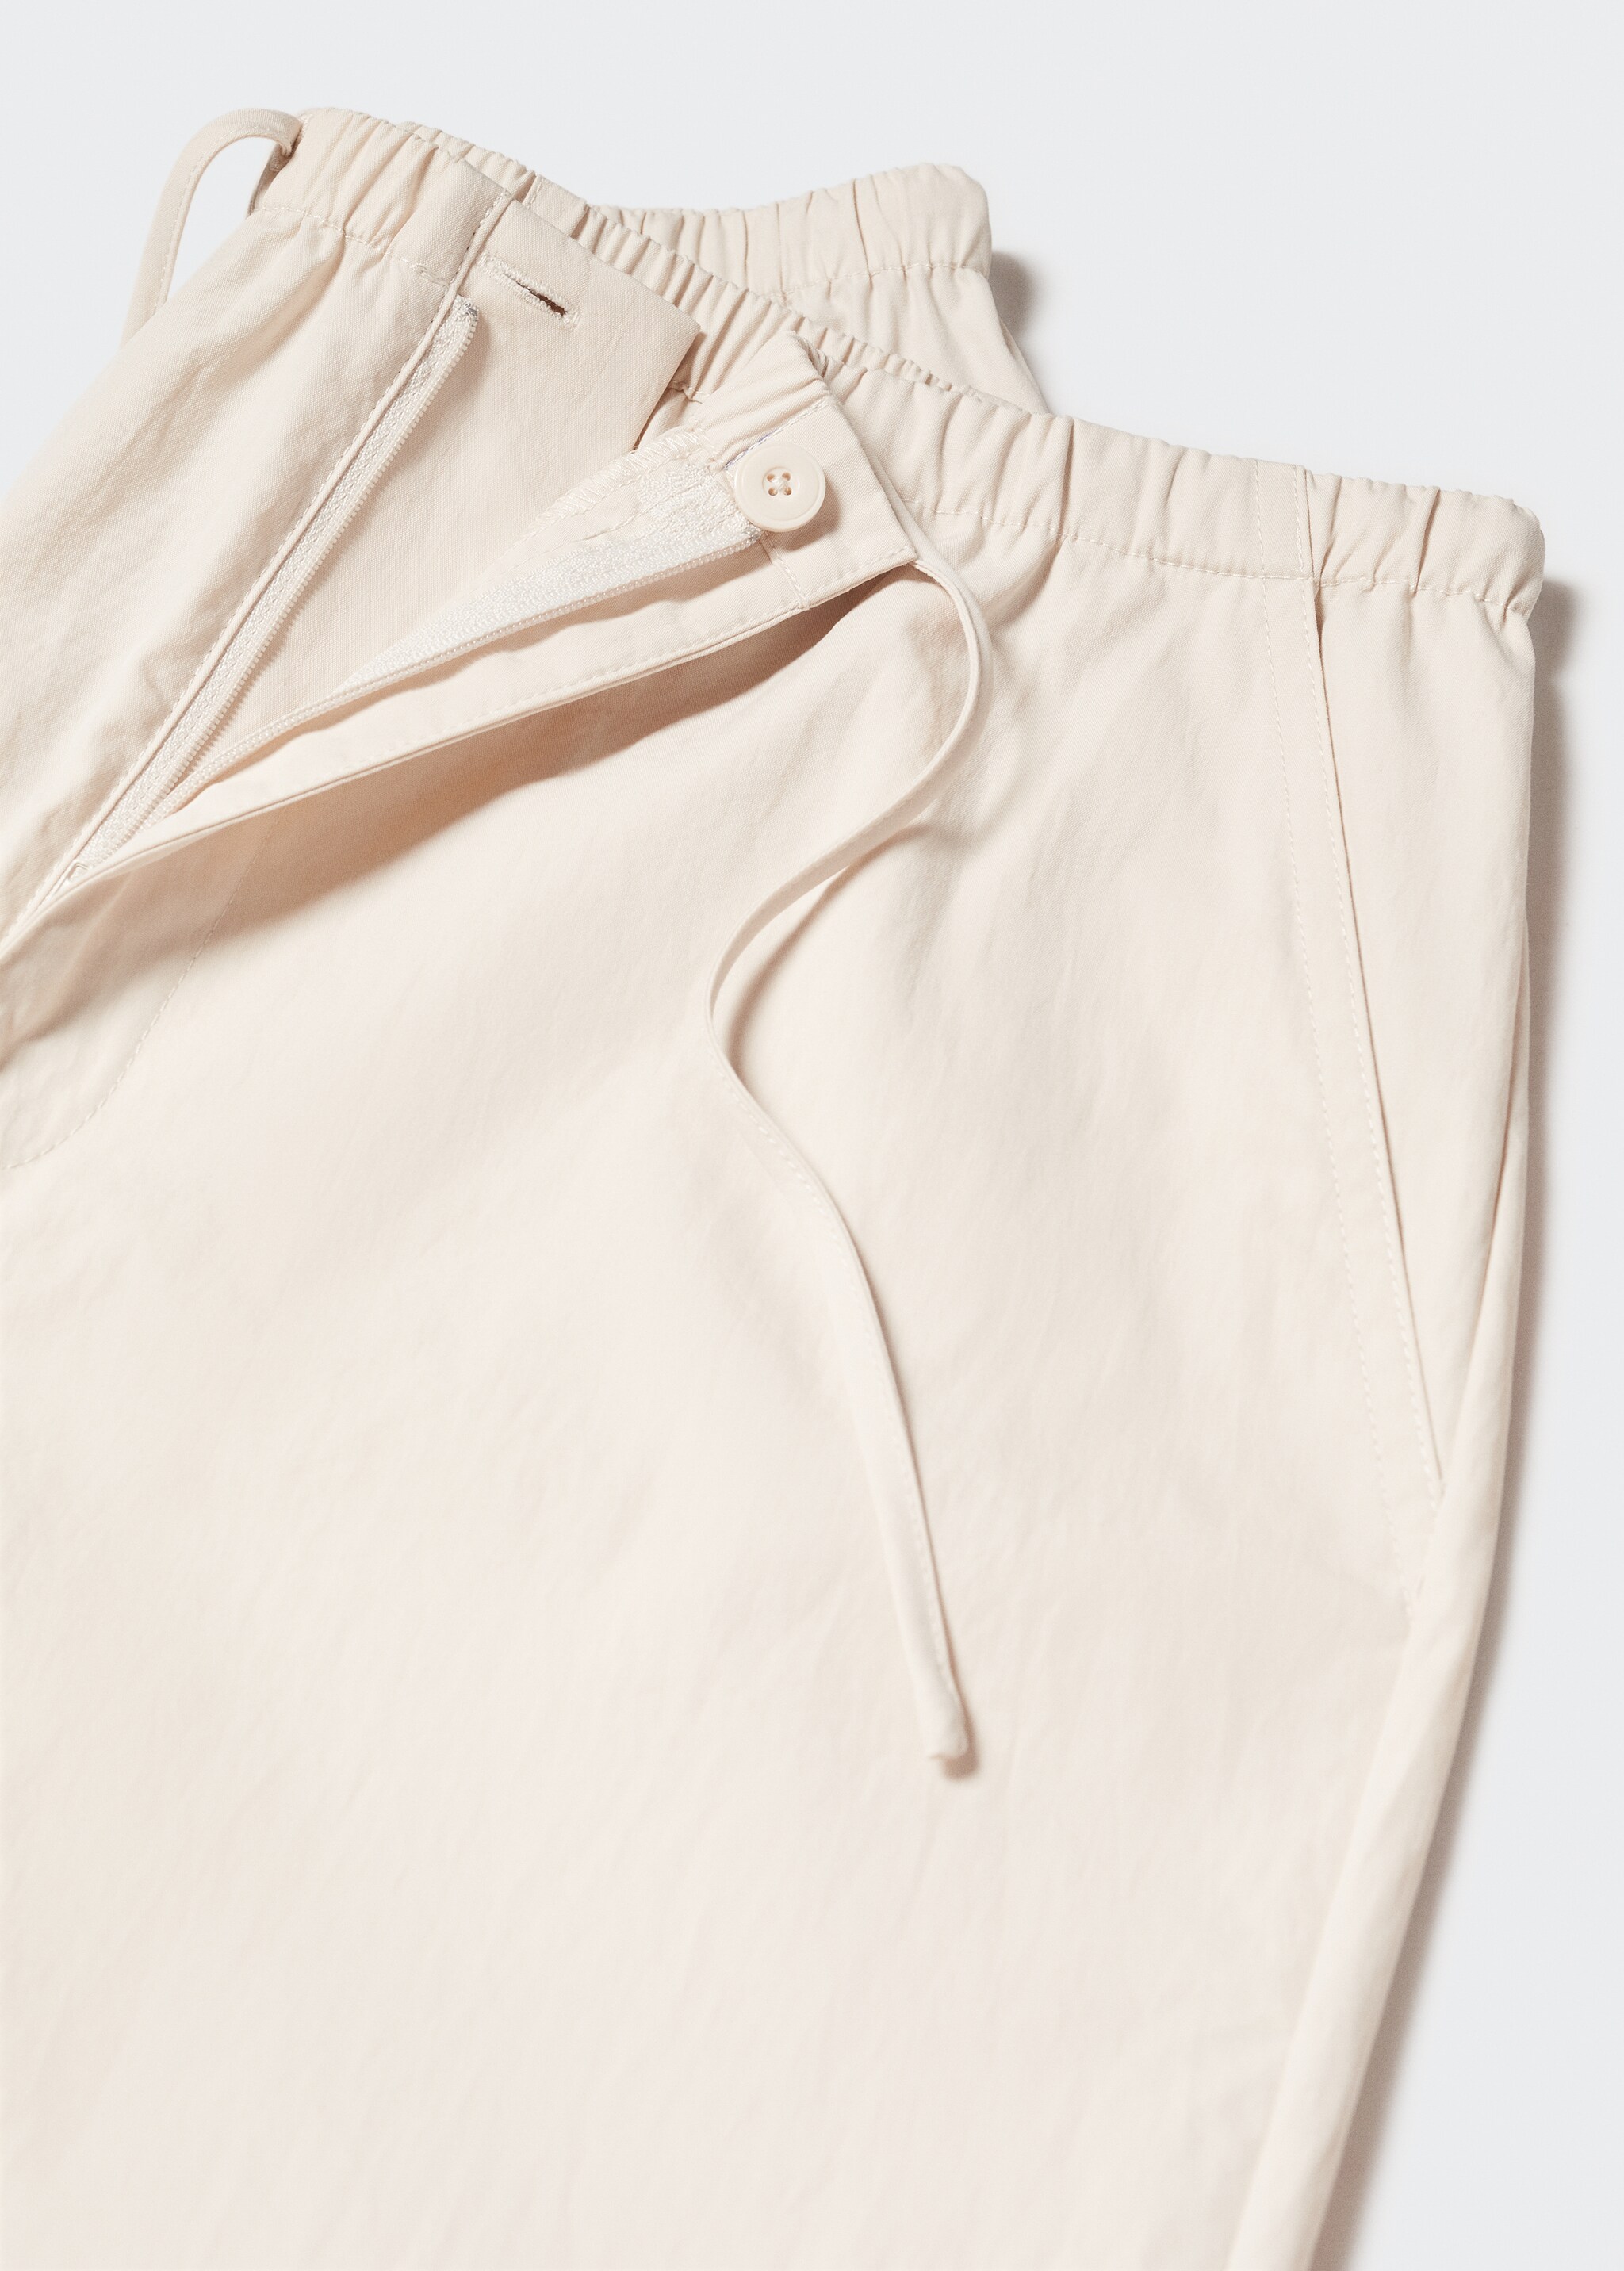 Parachute trousers - Details of the article 8